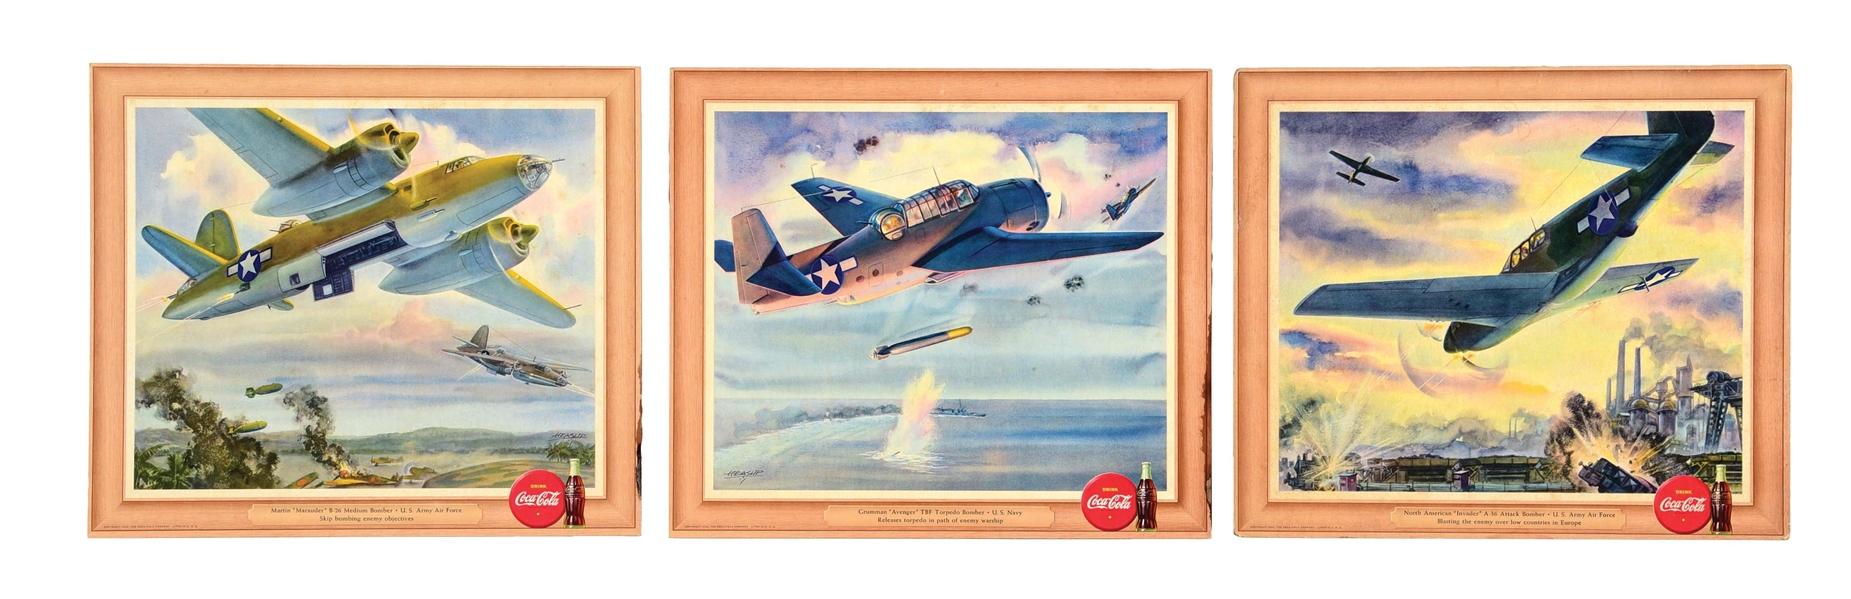 COLLECTION OF 3 DRINK COCA-COLA CARDBOARD LITHOGRAPHS W/ AIRPLANE GRAPHIC.